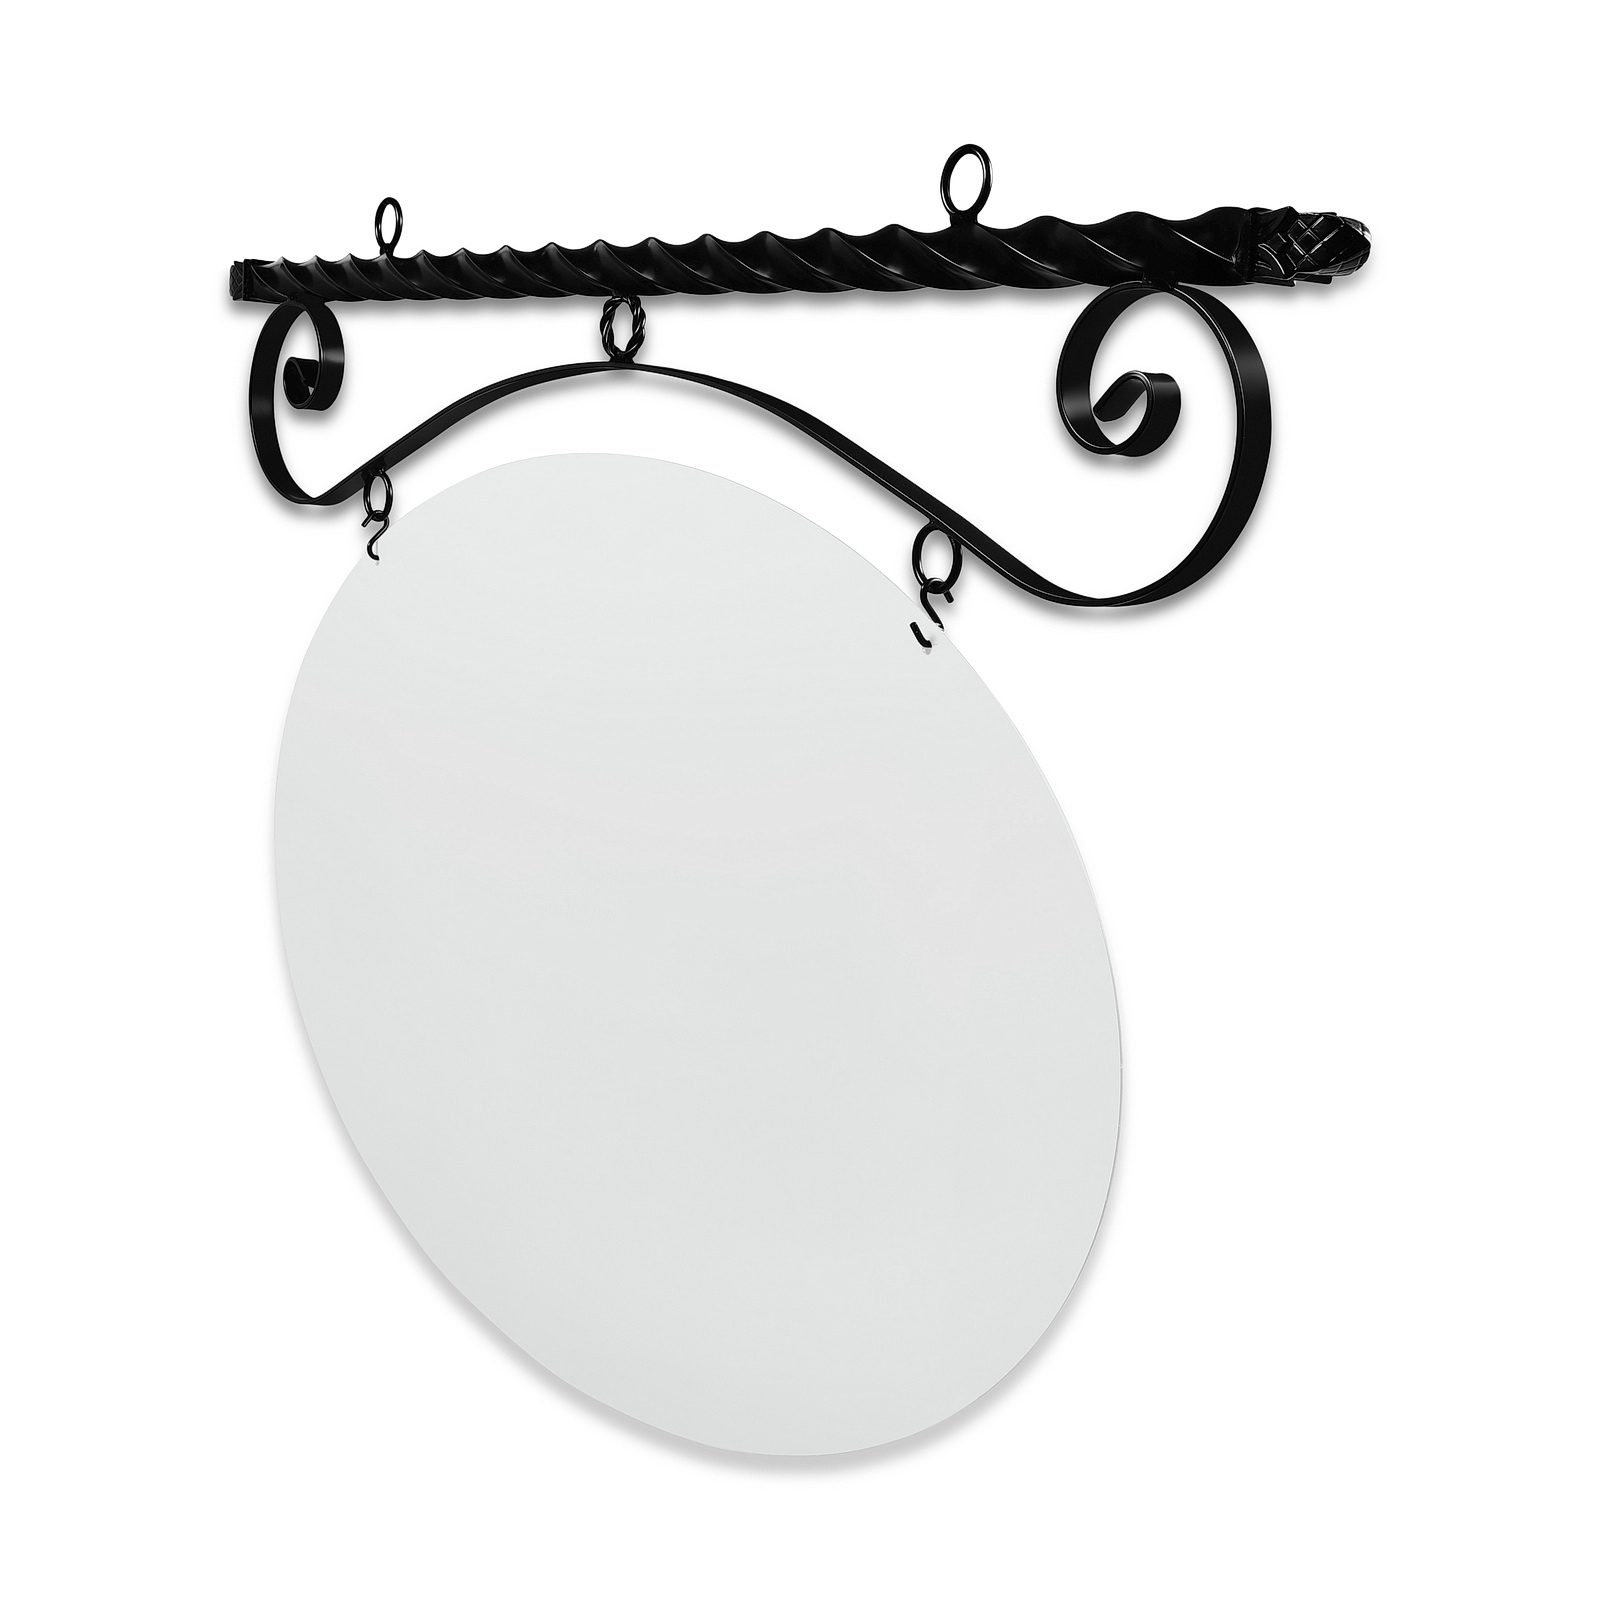 48'' Wide Ceiling Mount Bracket in  Black Powder Coated Steel with 30'' Tall X 46'' Wide X .080'' Thick White Aluminum Sign Blank and 2 Black Powder Coated S-Hooks (Pineapple Finial)